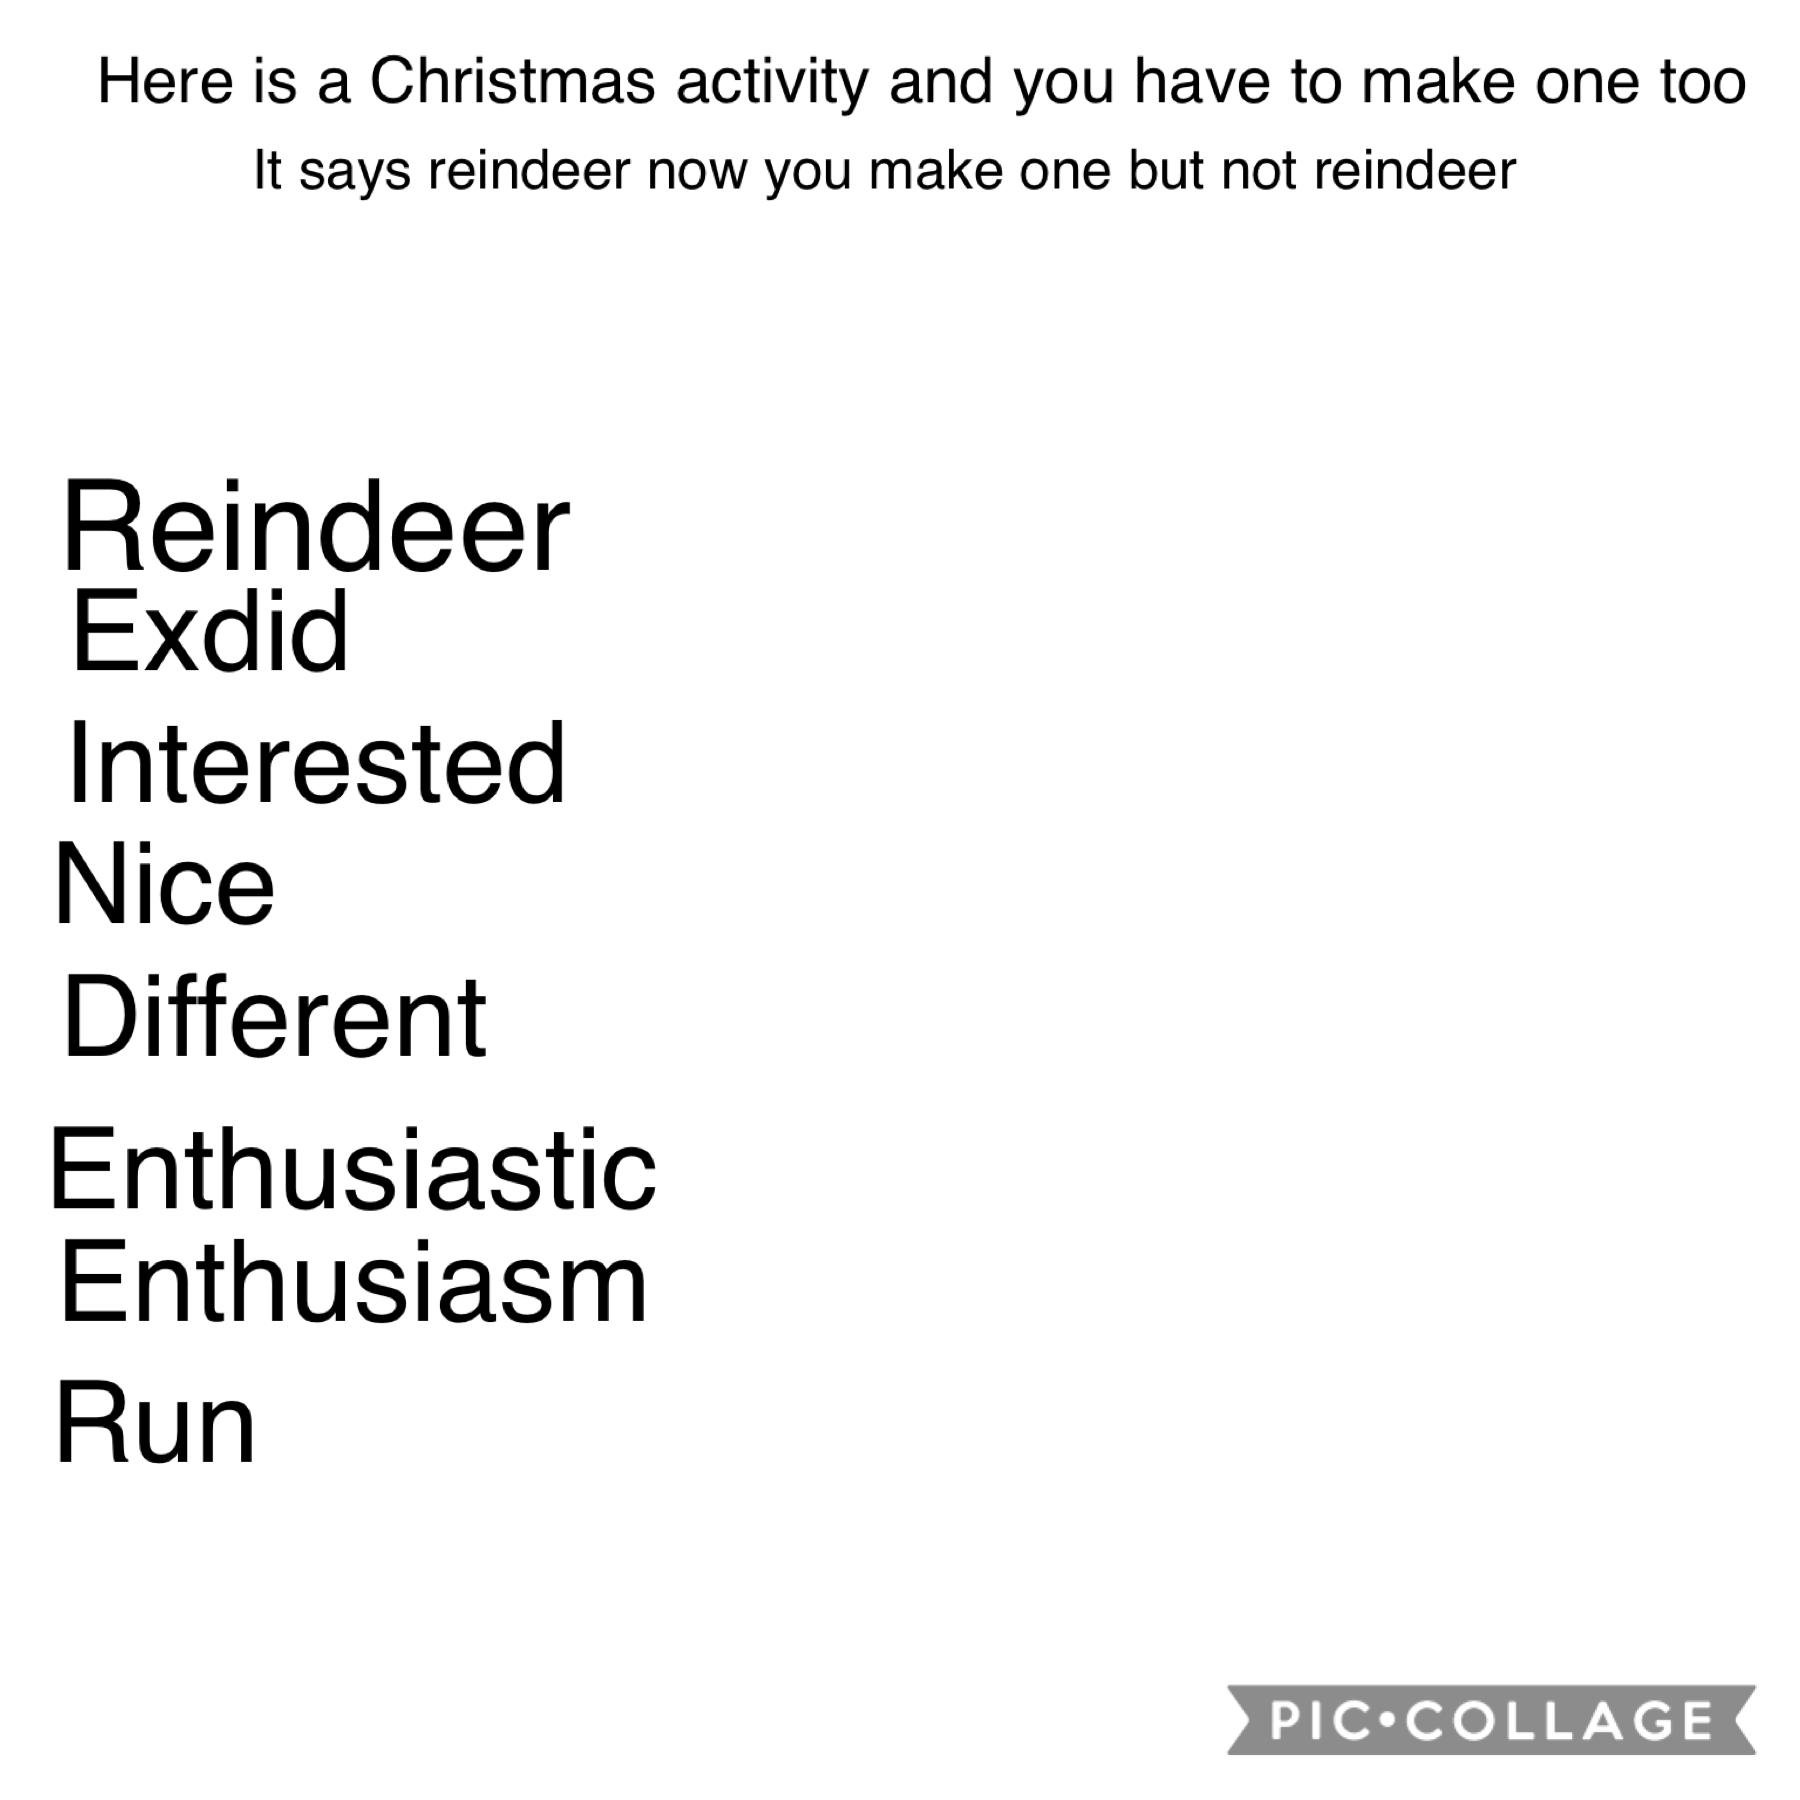 It says reindeer don’t copy it but make one of yours